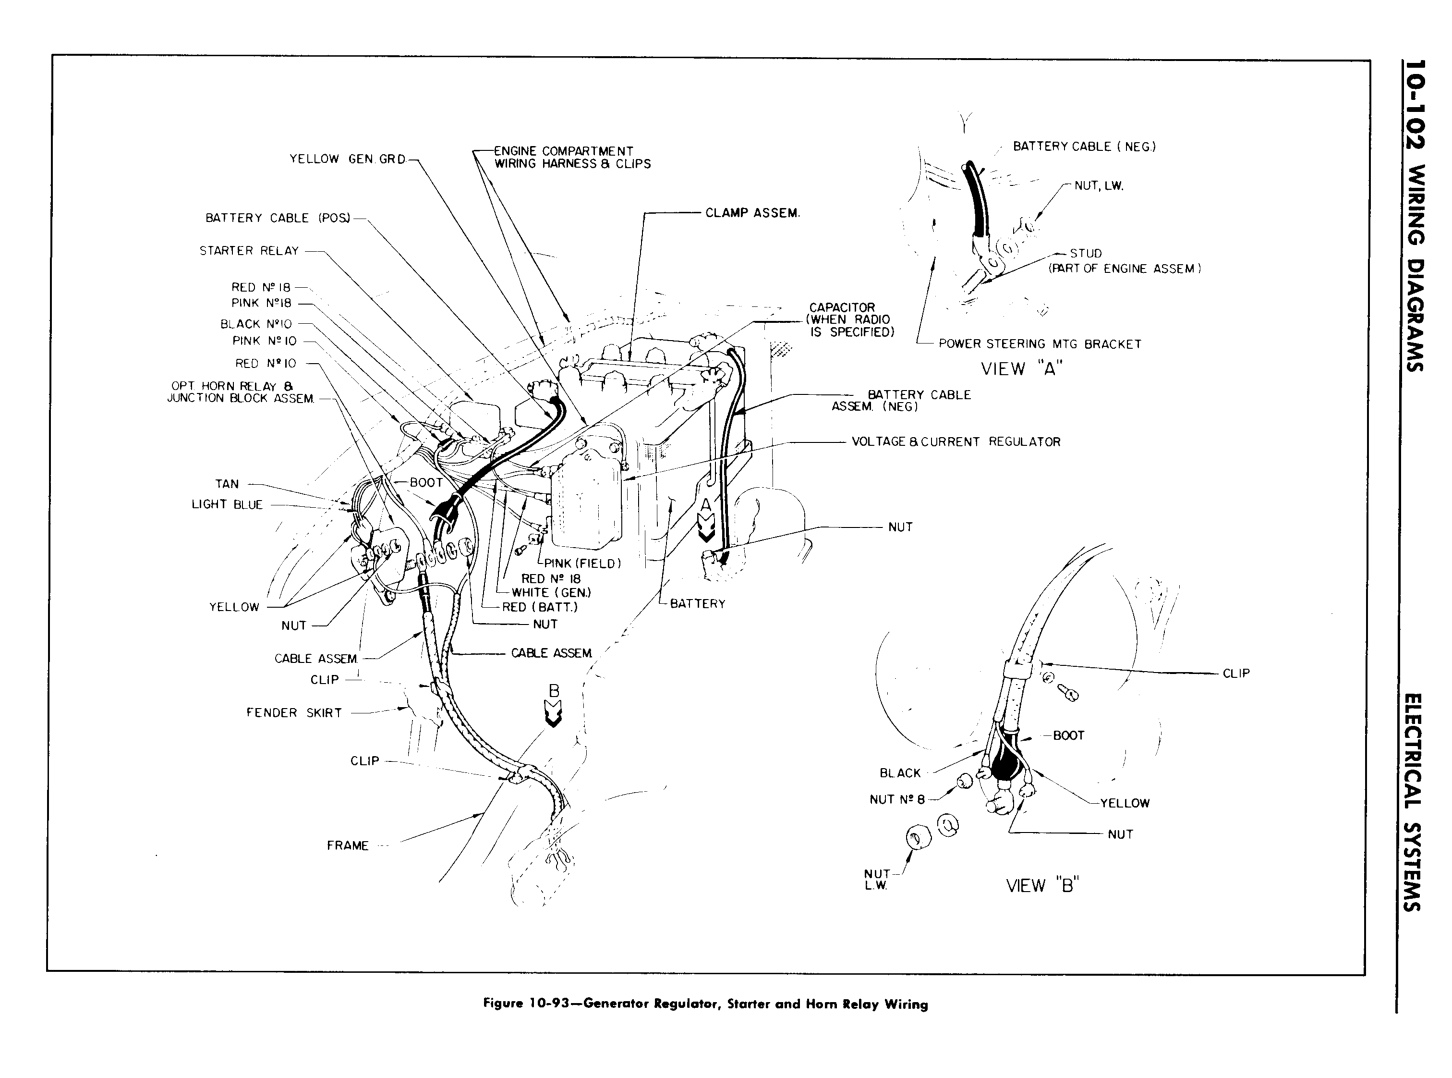 n_11 1960 Buick Shop Manual - Electrical Systems-102-102.jpg